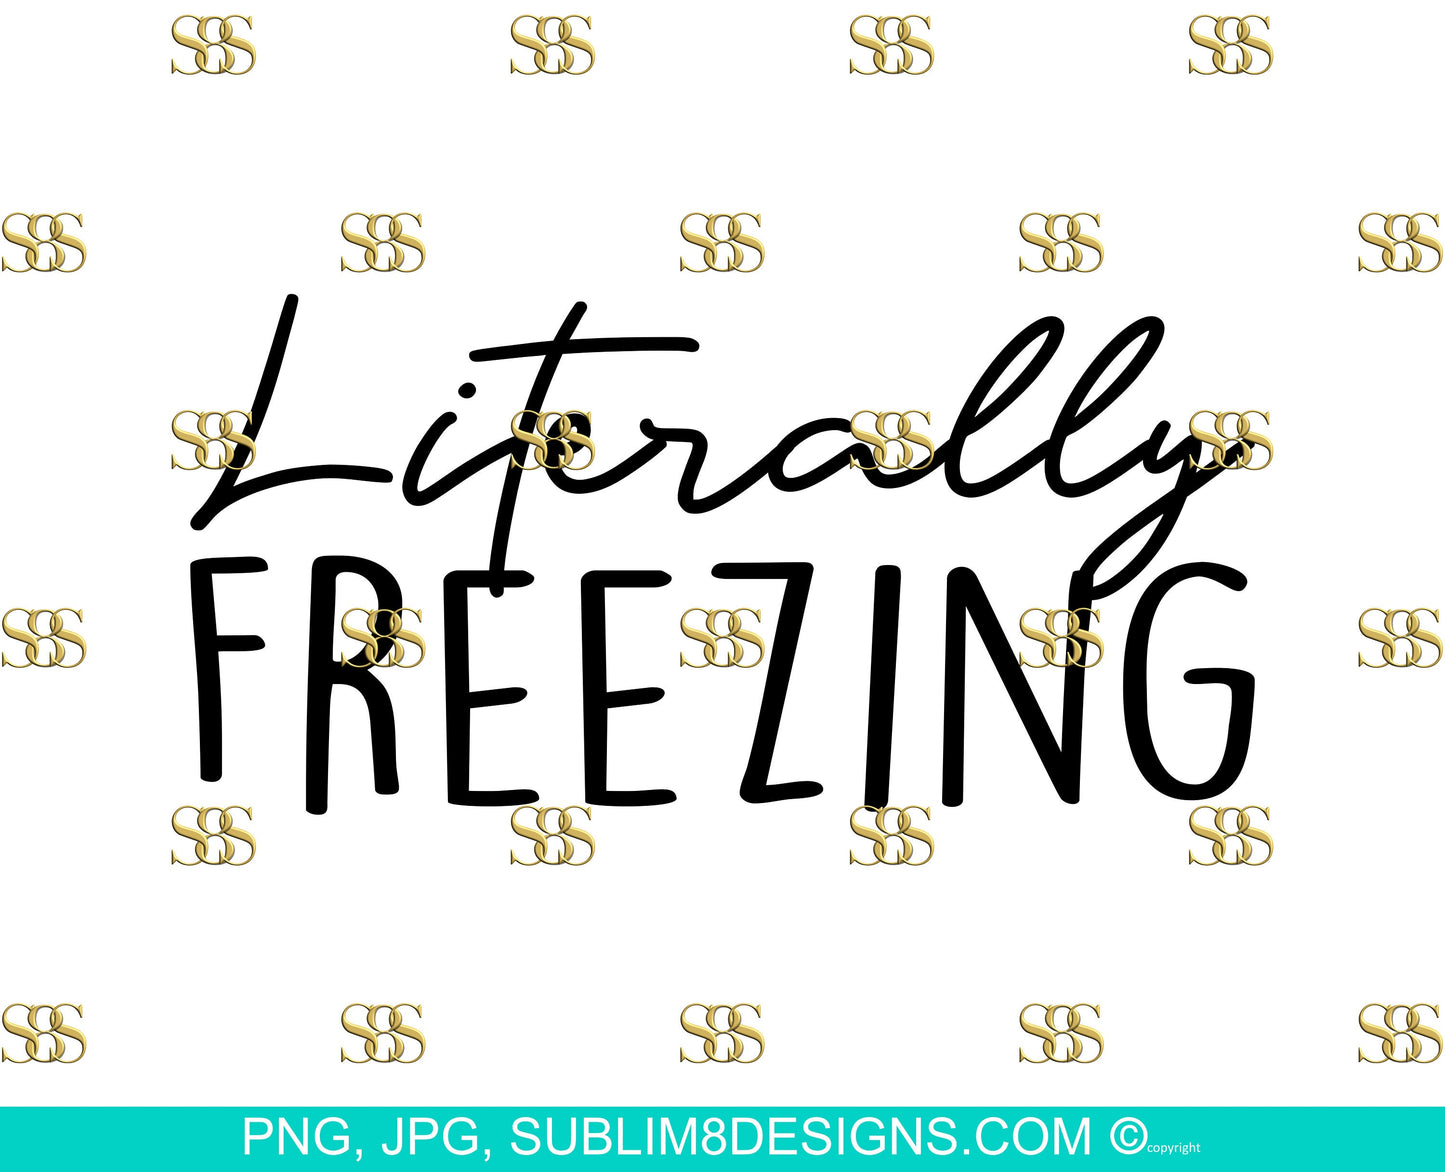 Litterallly Freezing SVG, PNG and JPG